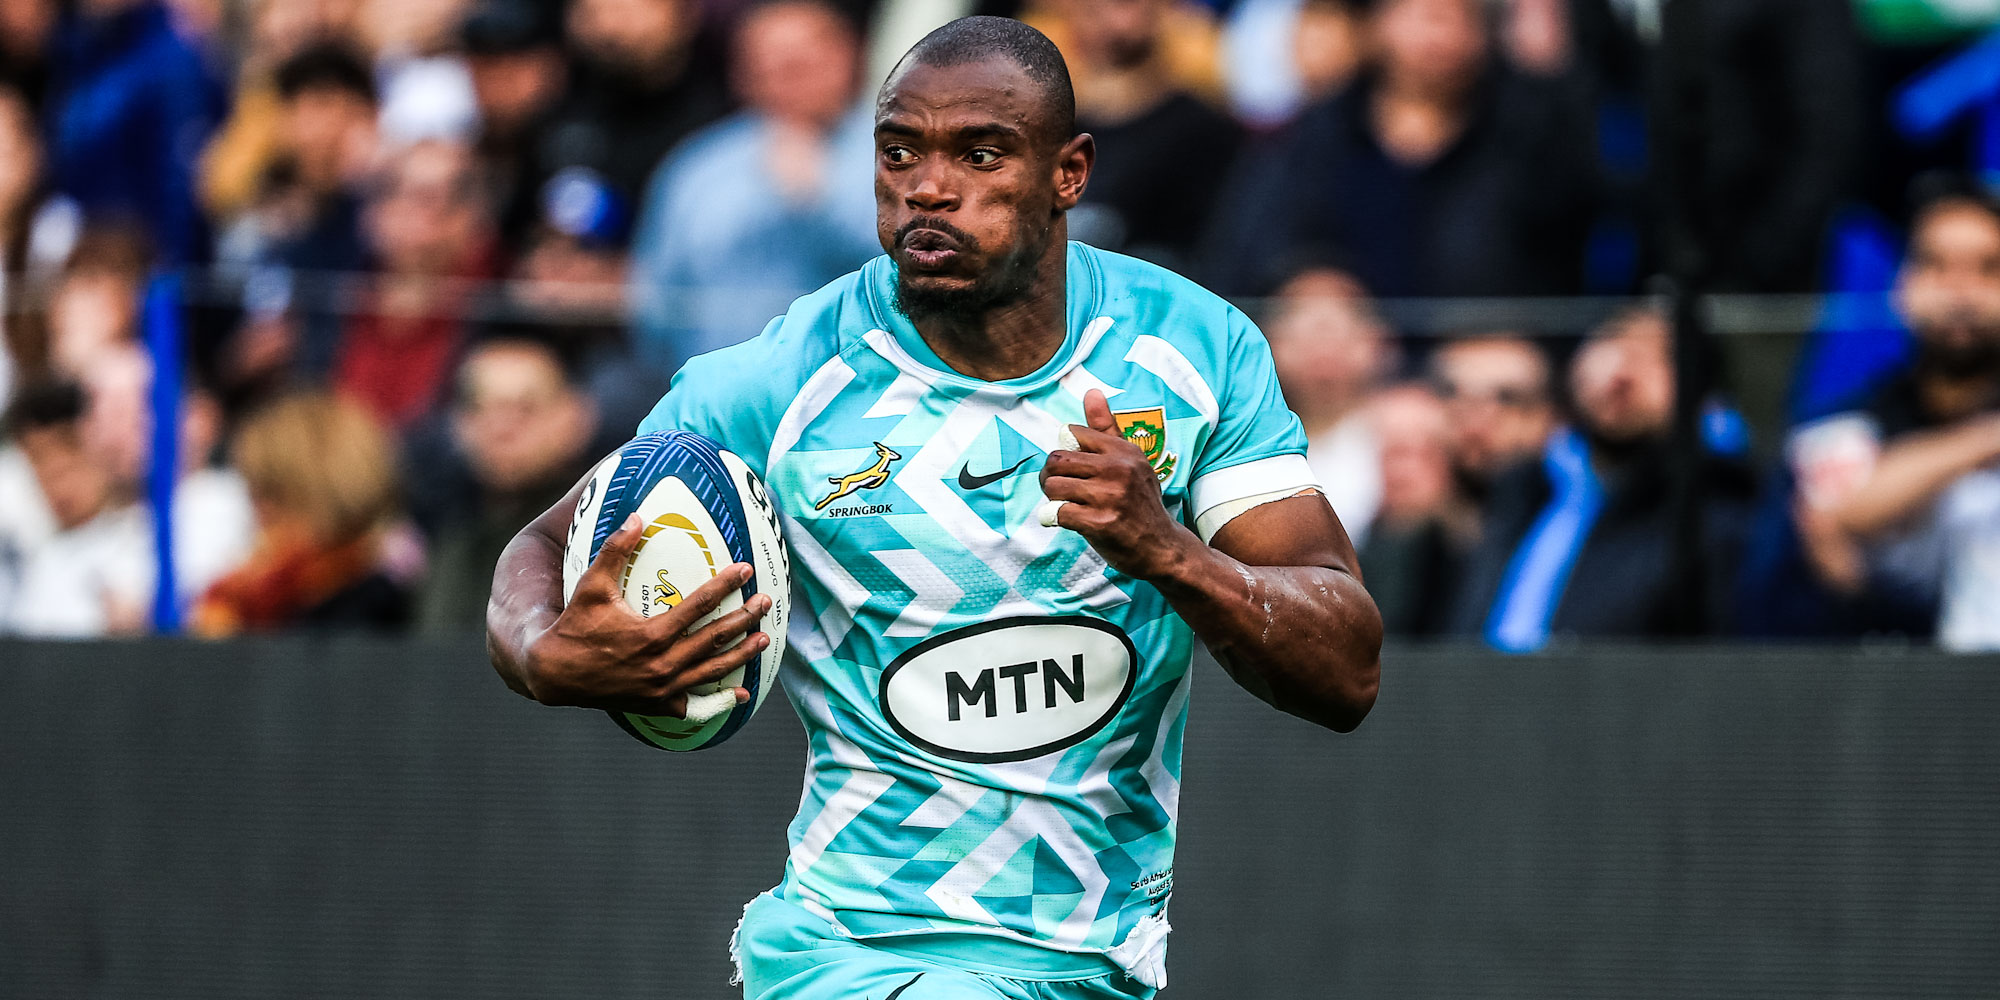 Makazole Mapimpi races away for his try shortly after the break.